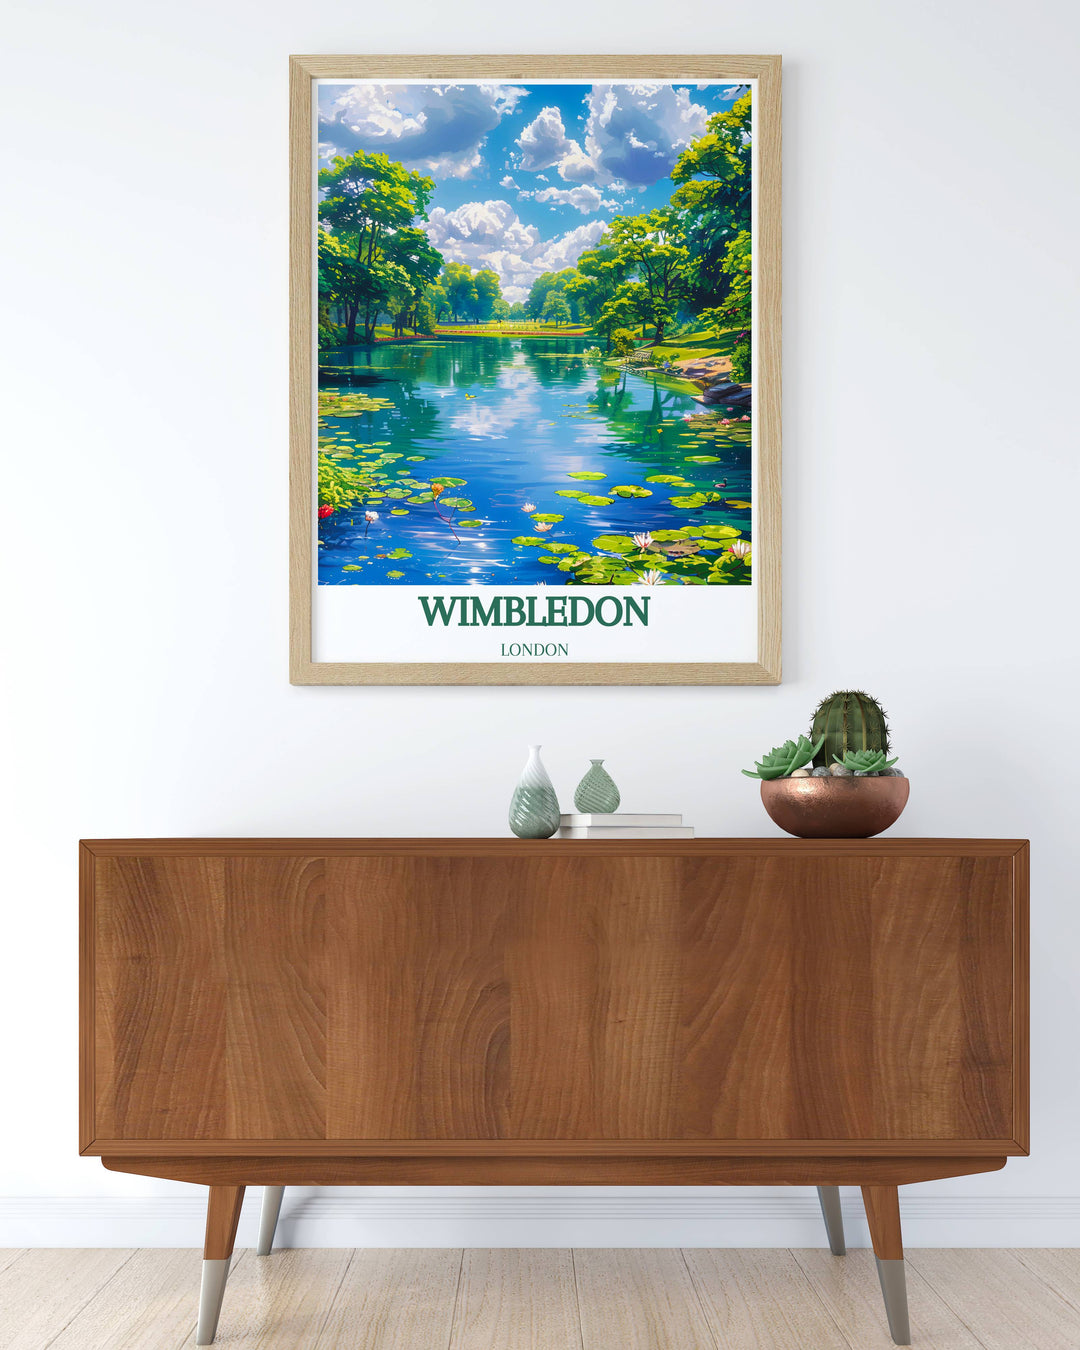 Wimbledon Windmill poster capturing the architectural beauty and historical significance of this iconic landmark in vibrant colors and intricate details.